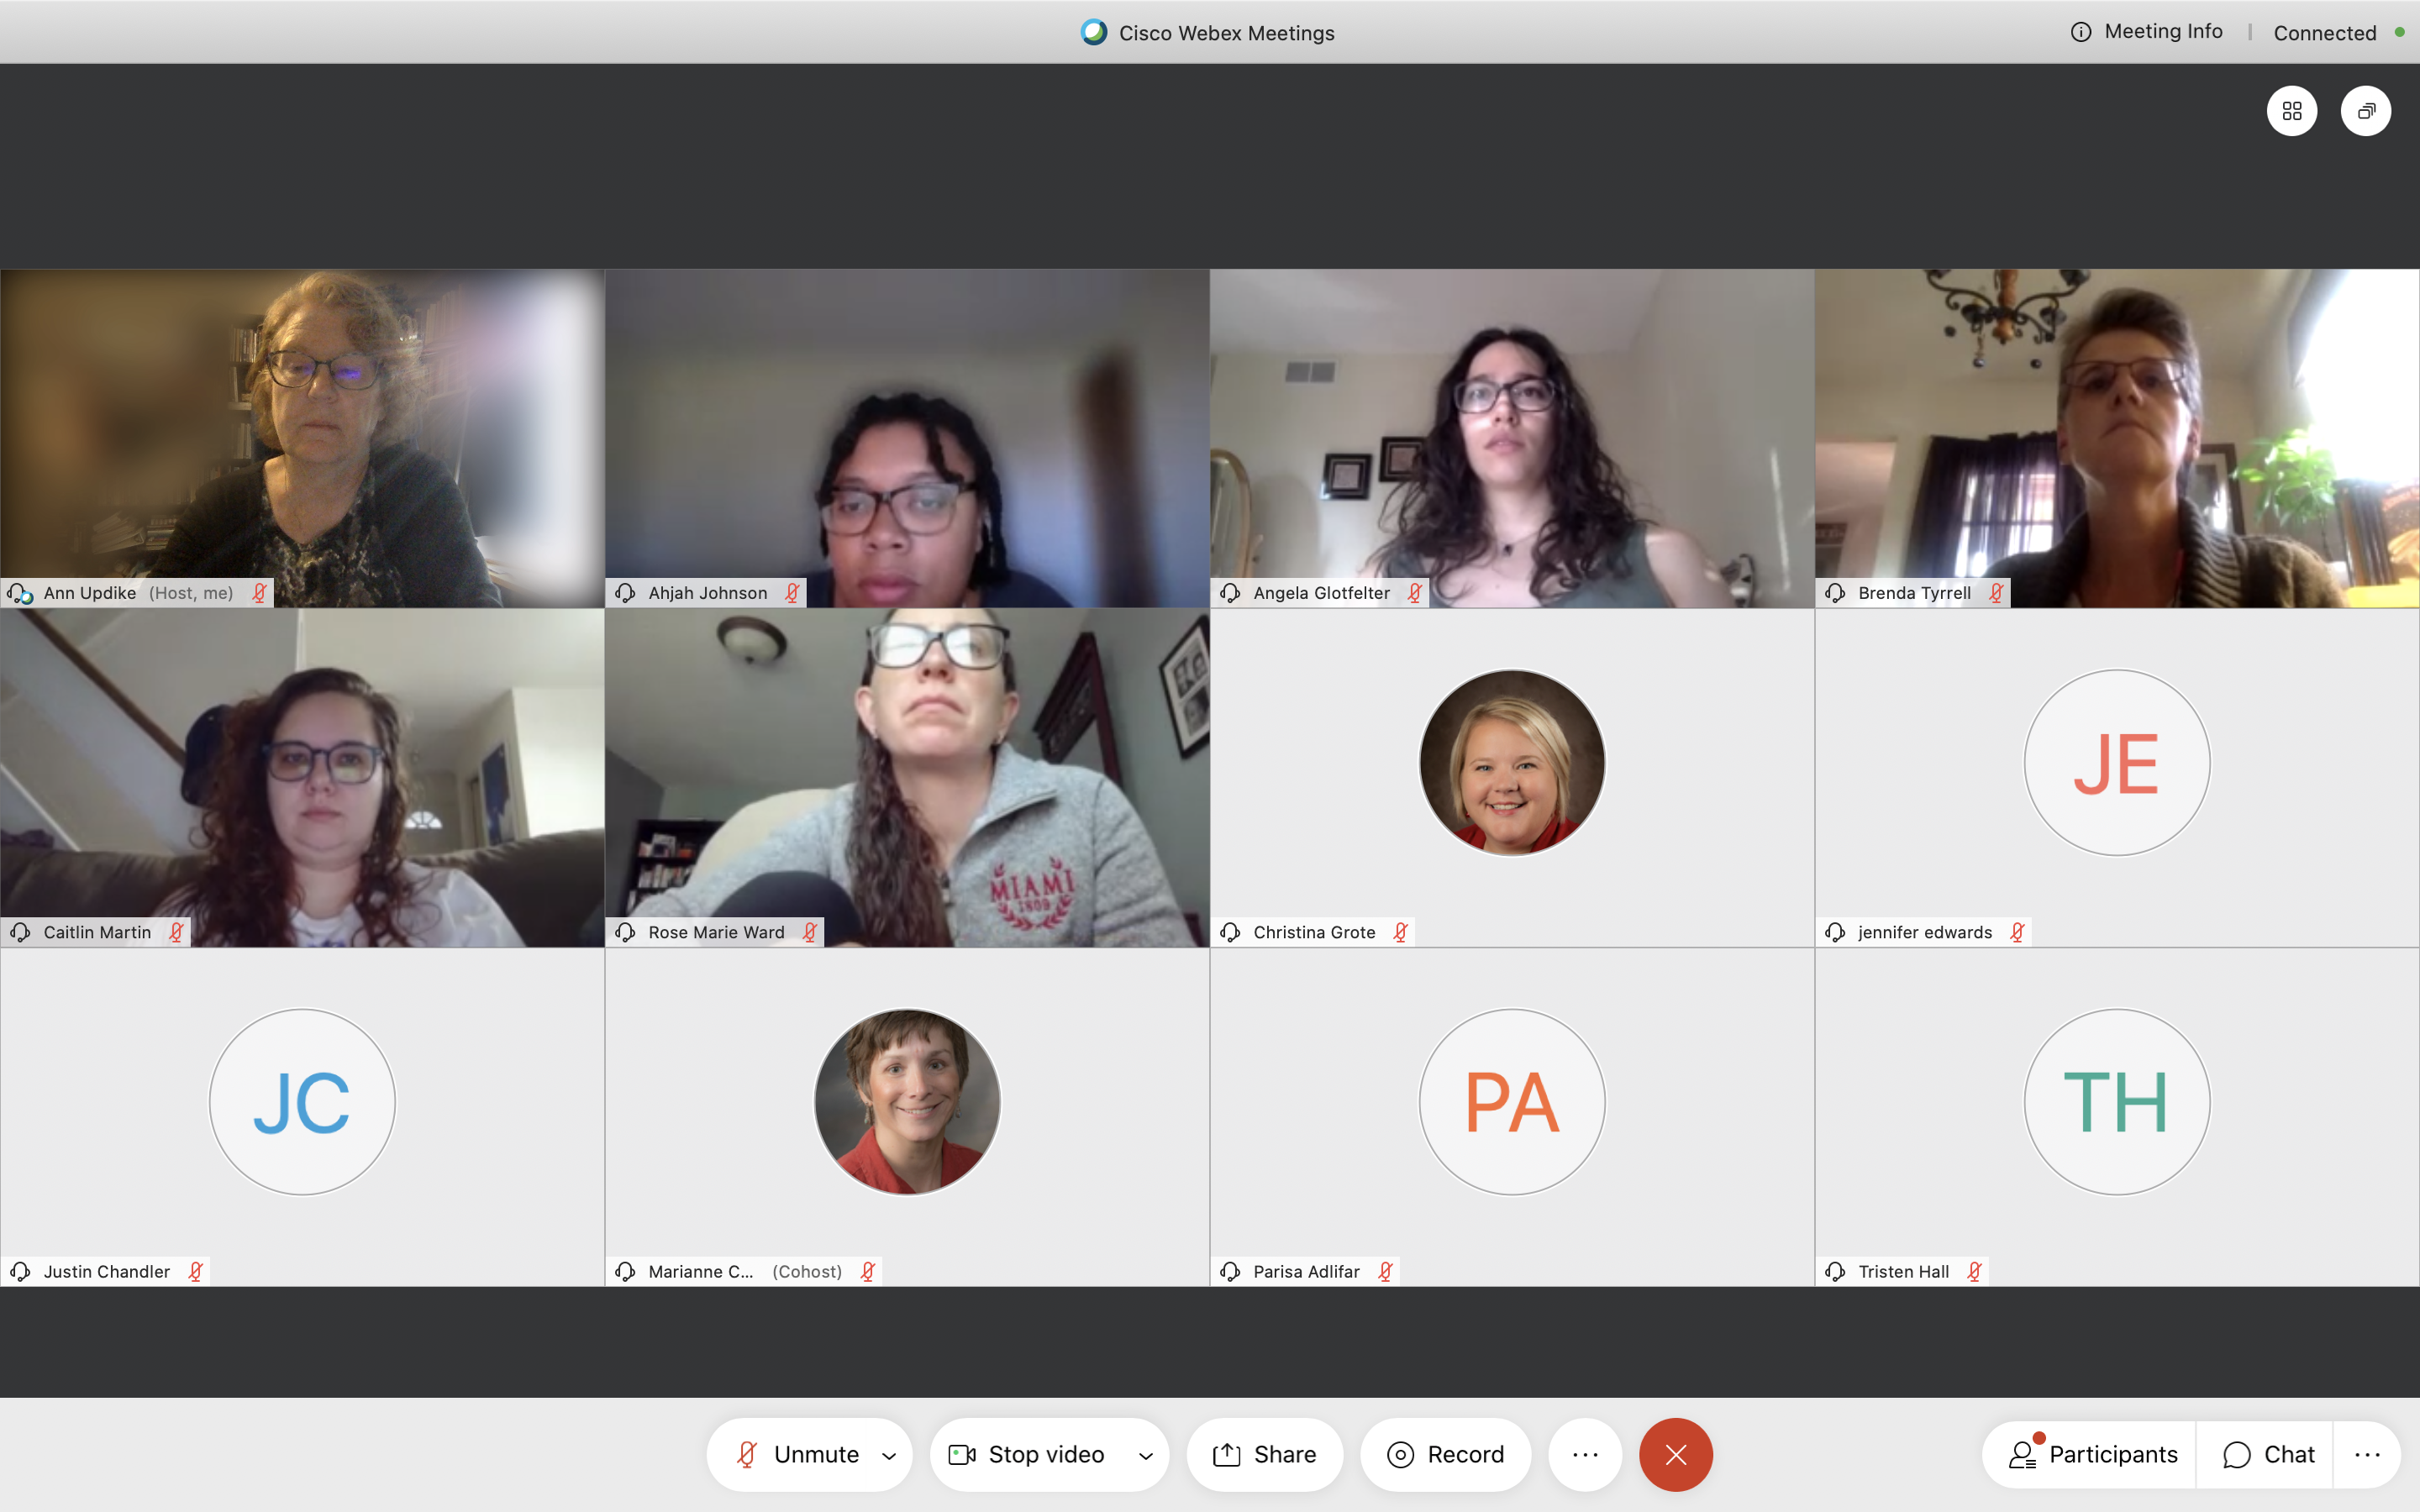 Screencapture of multiple virtual retreat attendees in the cisco webex chat room.